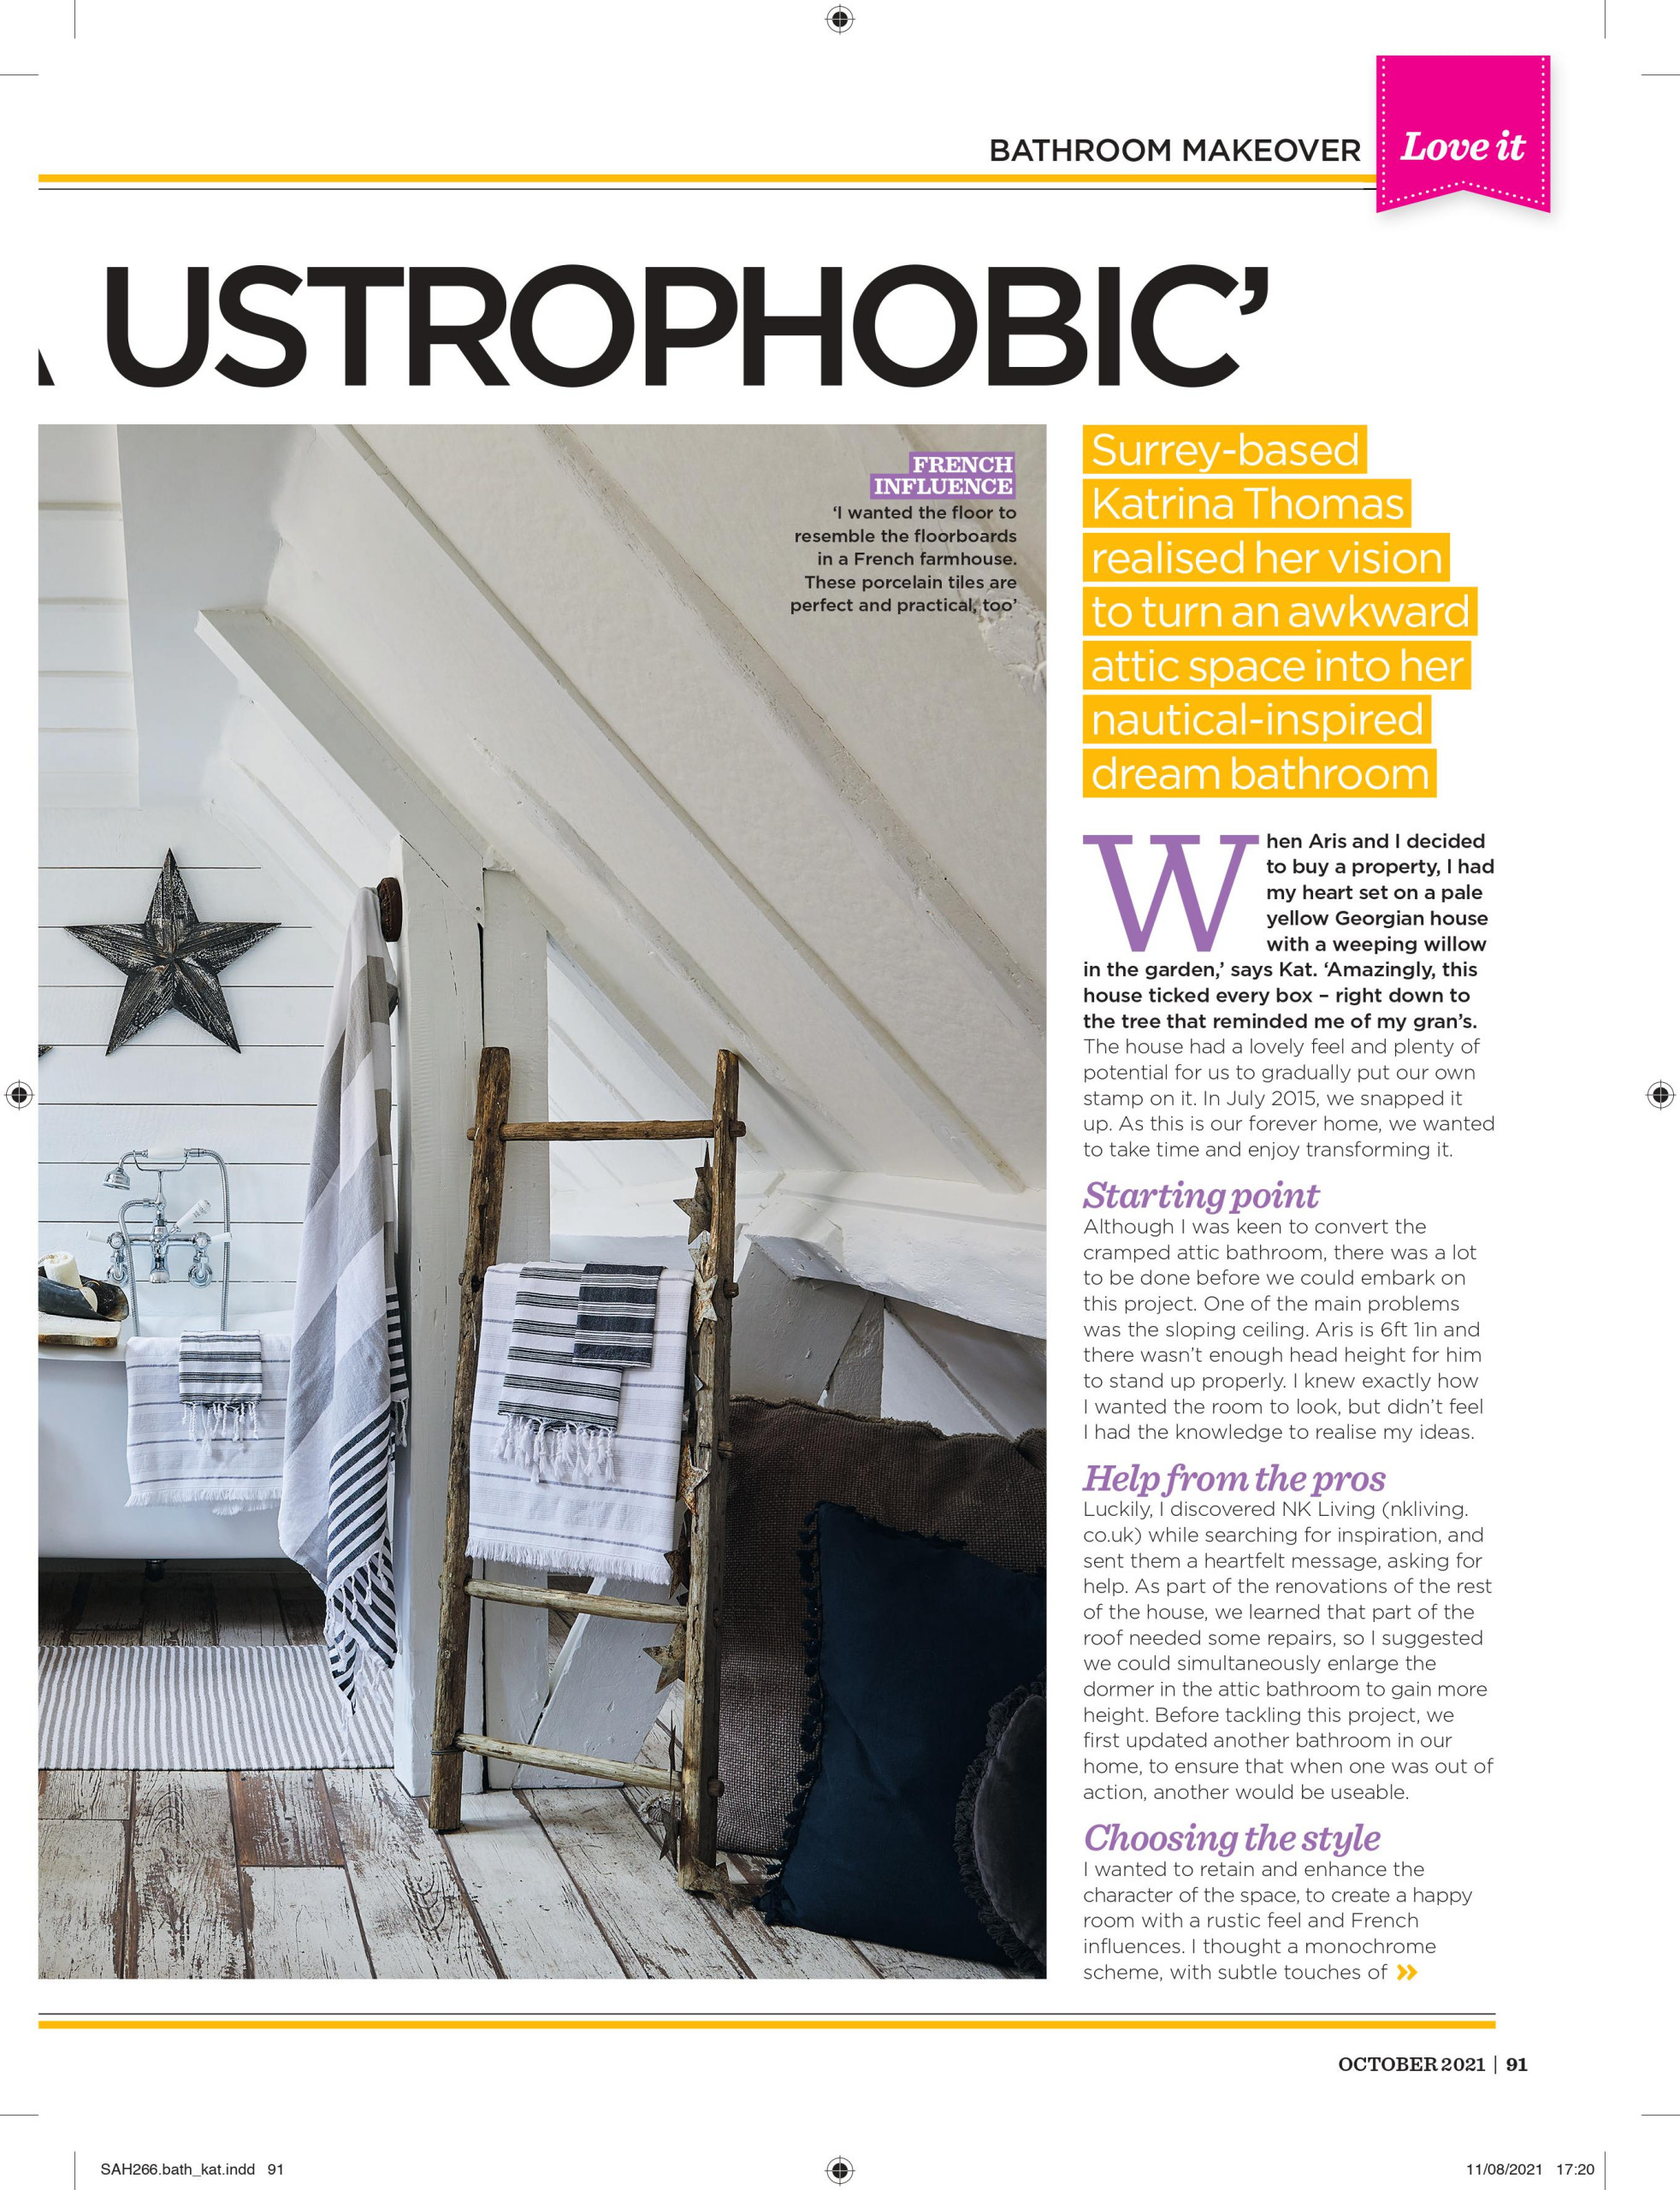 Publication Feature on Nautical-Inspired Bathroom Renovation